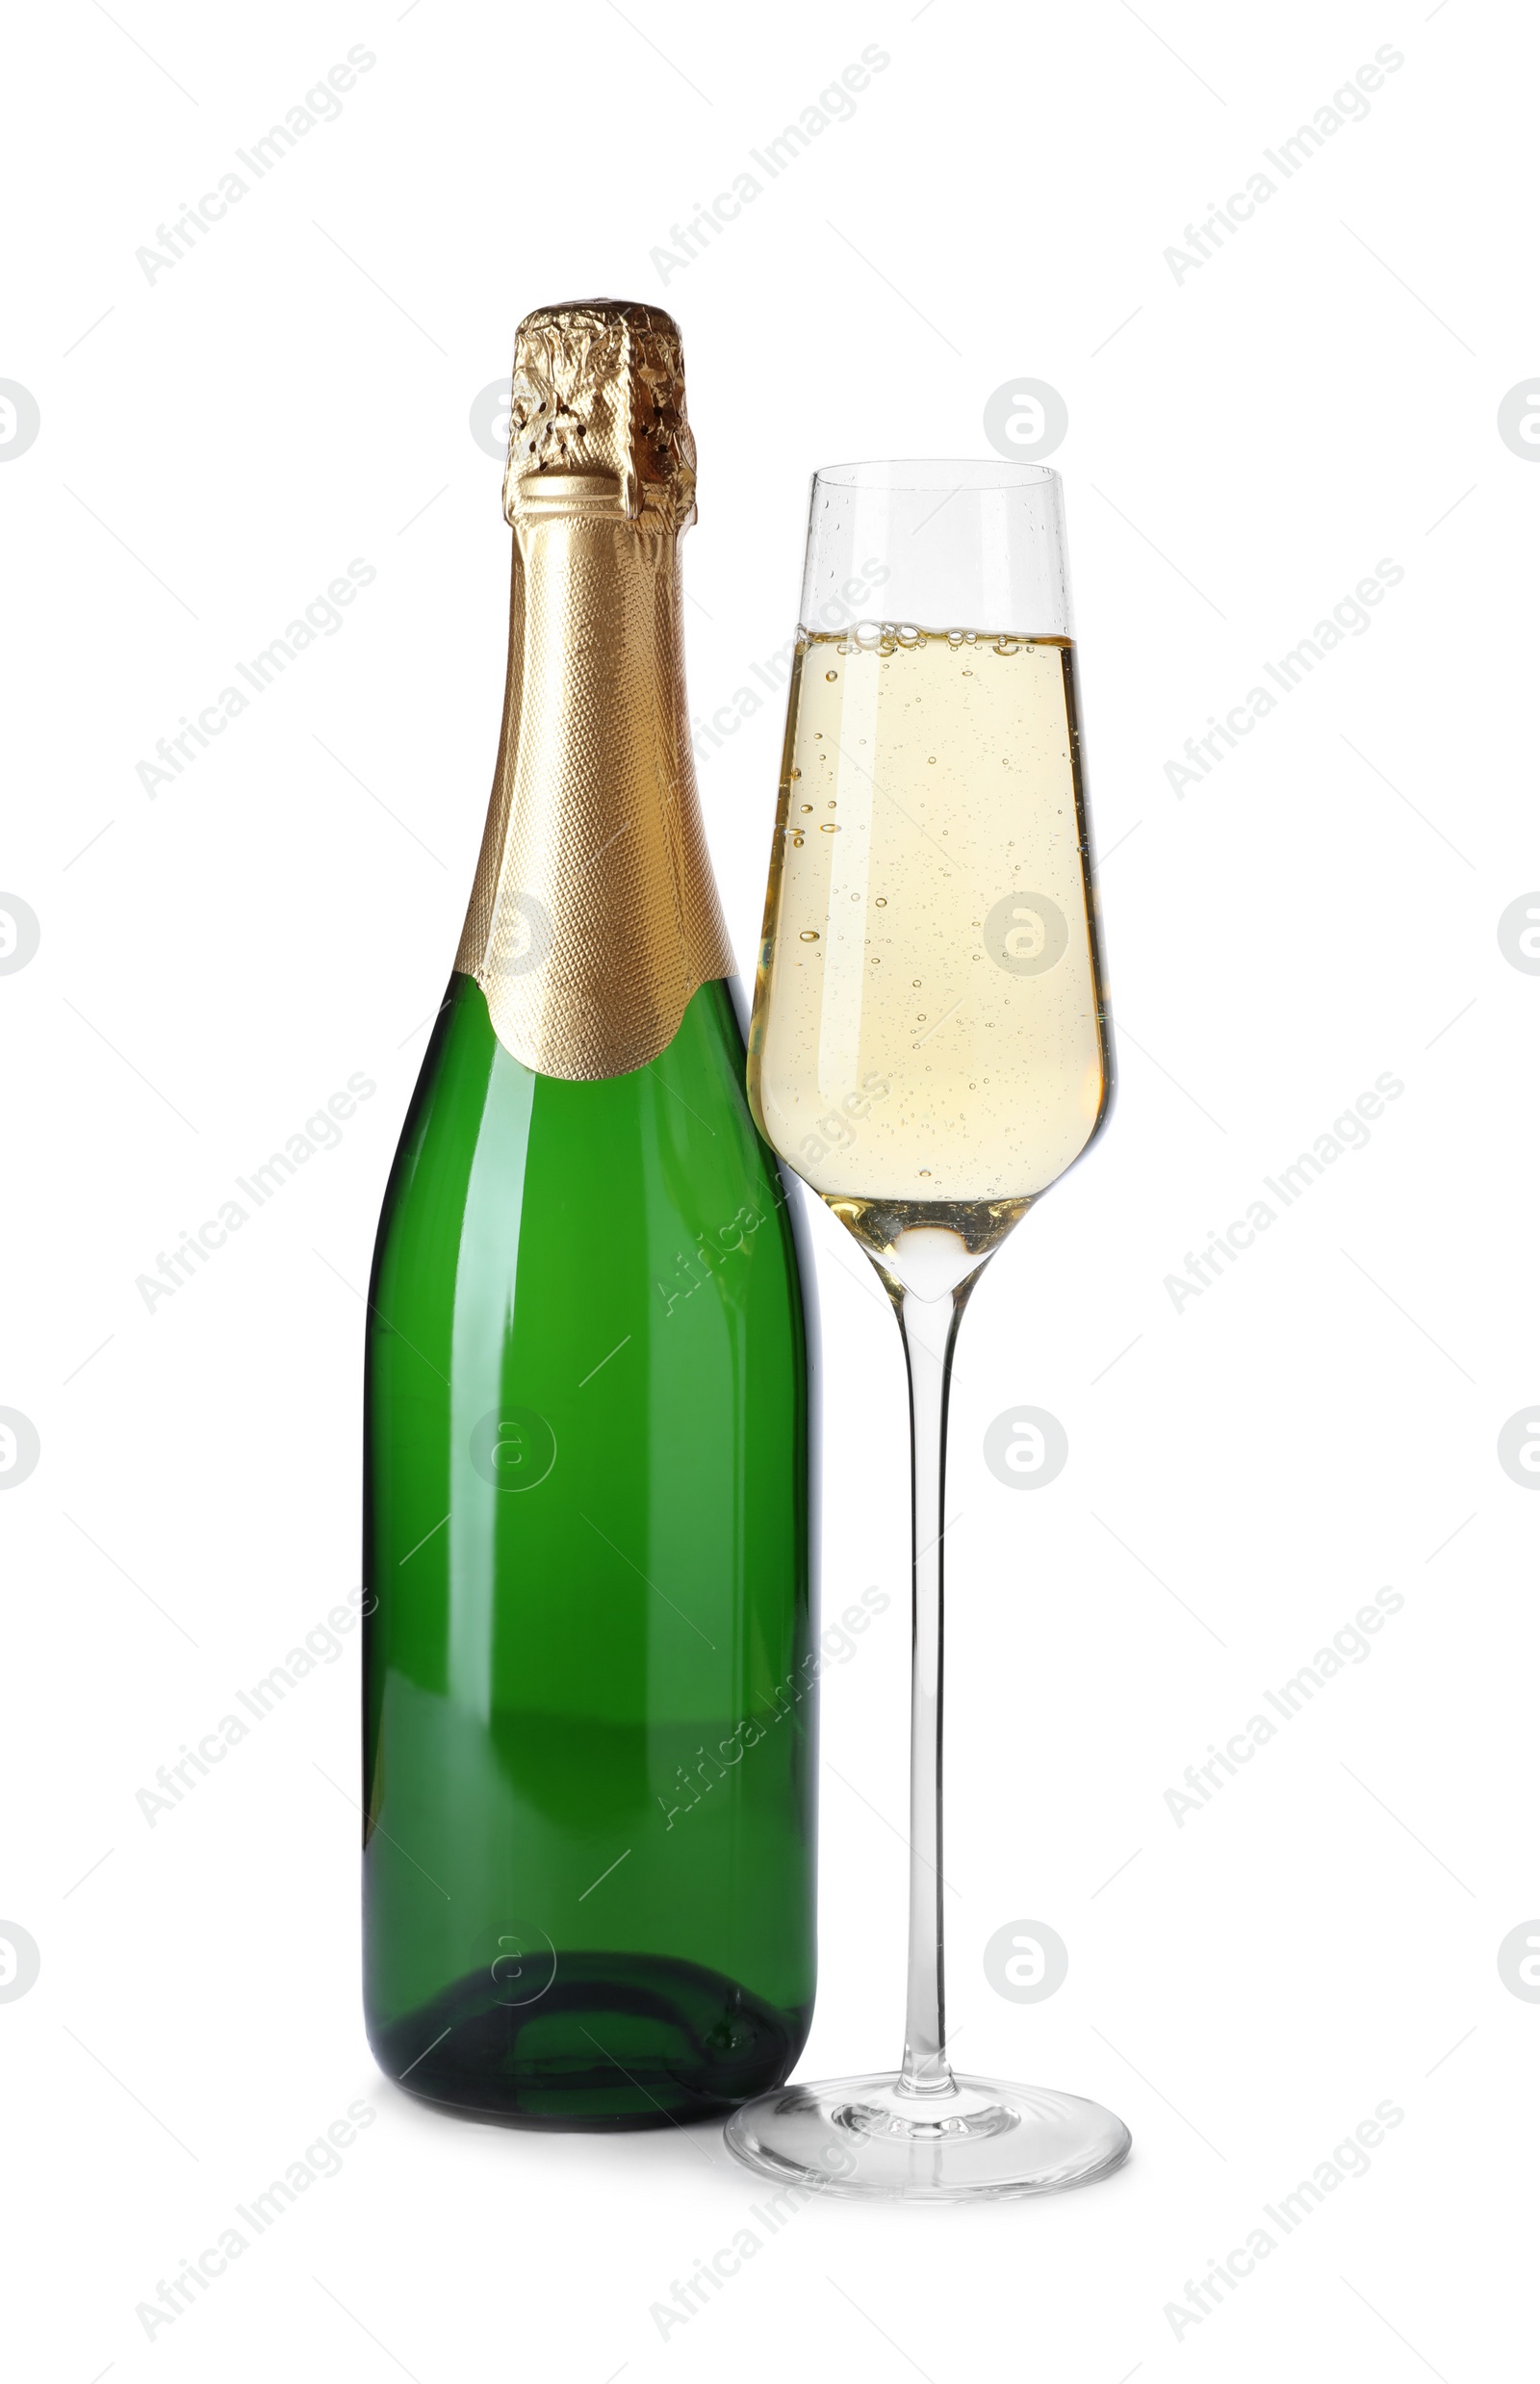 Photo of Bottle and glass with champagne on white background. Festive drink